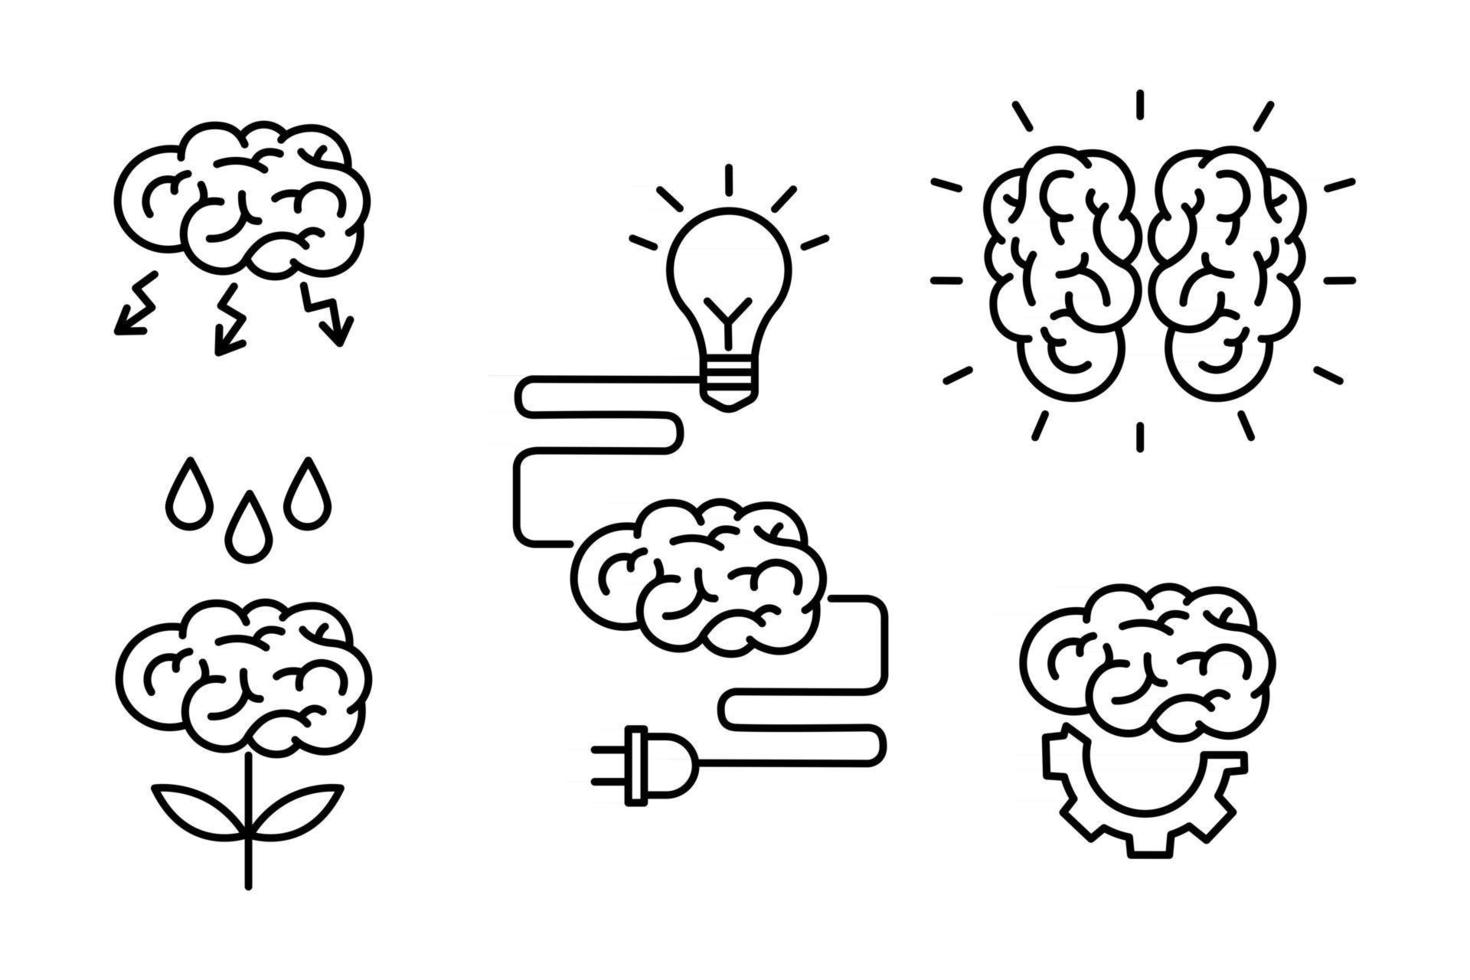 Brain, brainstorming, idea, creativity,knowledge concept set icons in outline style. Collection of human mind process, brain features and emotions. Vector doodle illustration.